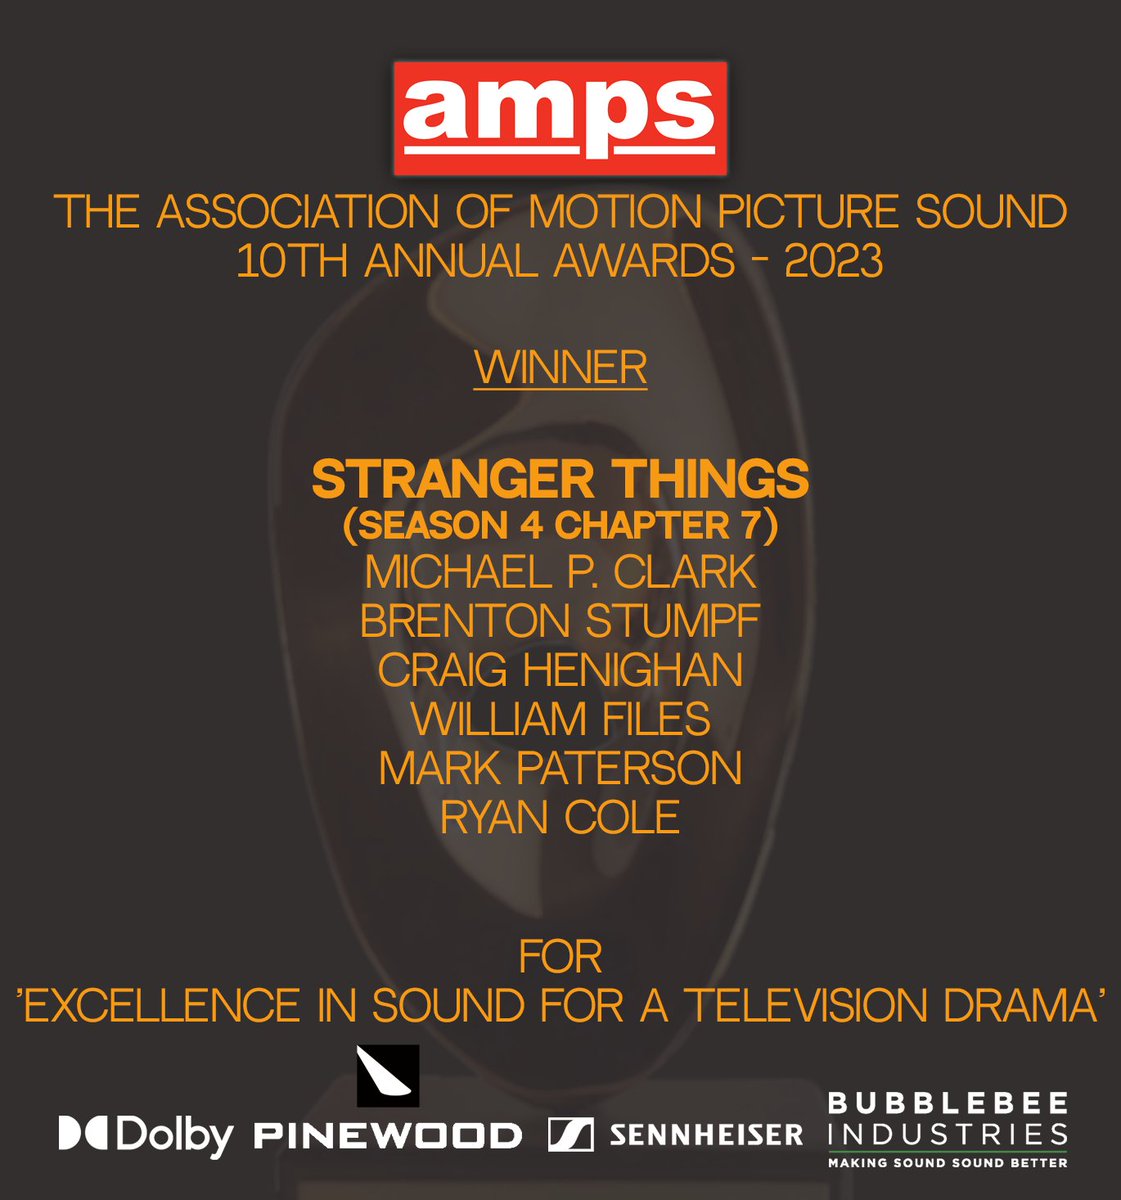 AMPS 10th Annual Awards - 2023 WINNER Stranger Things - Season 4 Chapter 7 Michael P. Clark Brenton Stumpf Craig Henighan William Files Mark Paterson Ryan Cole For 'Excellence in Sound for a Television Drama'. Congratulations to the team! #AMPSawards2023 @netflix